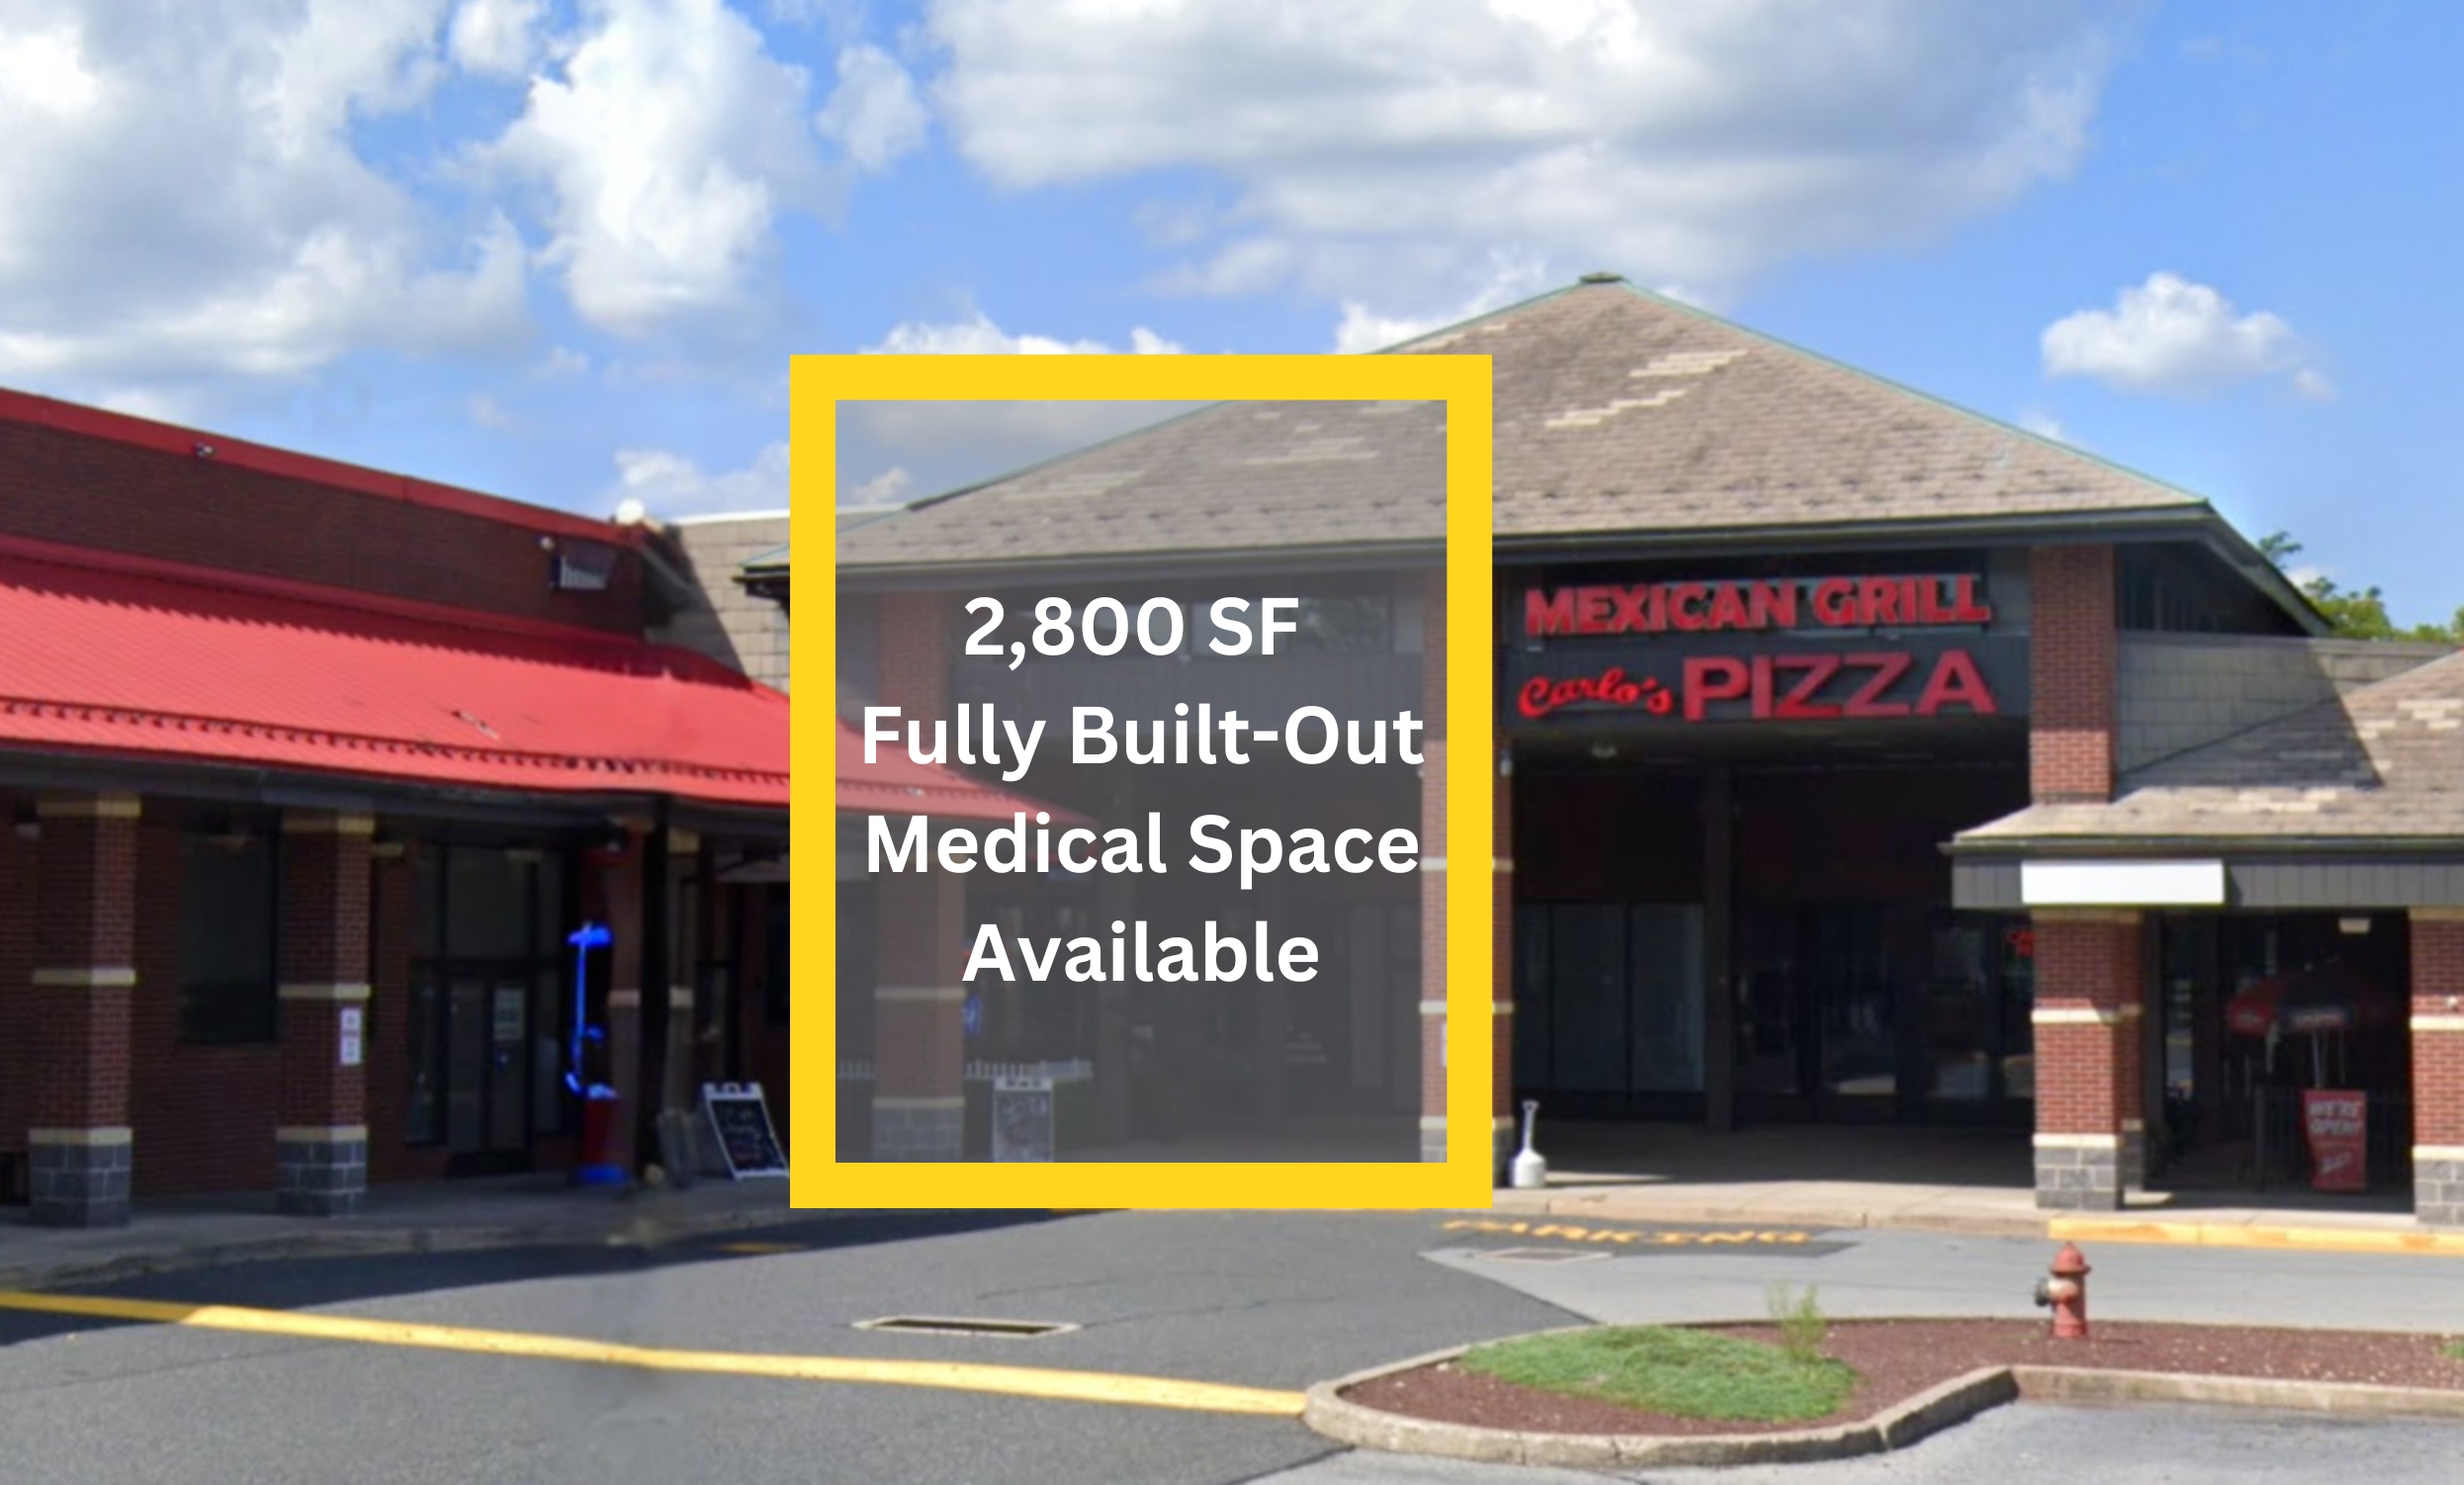 7001 North Route 309, Coopersburg, Pennsylvania 18036, ,Retail,For Lease,7001 North Route 309,1043